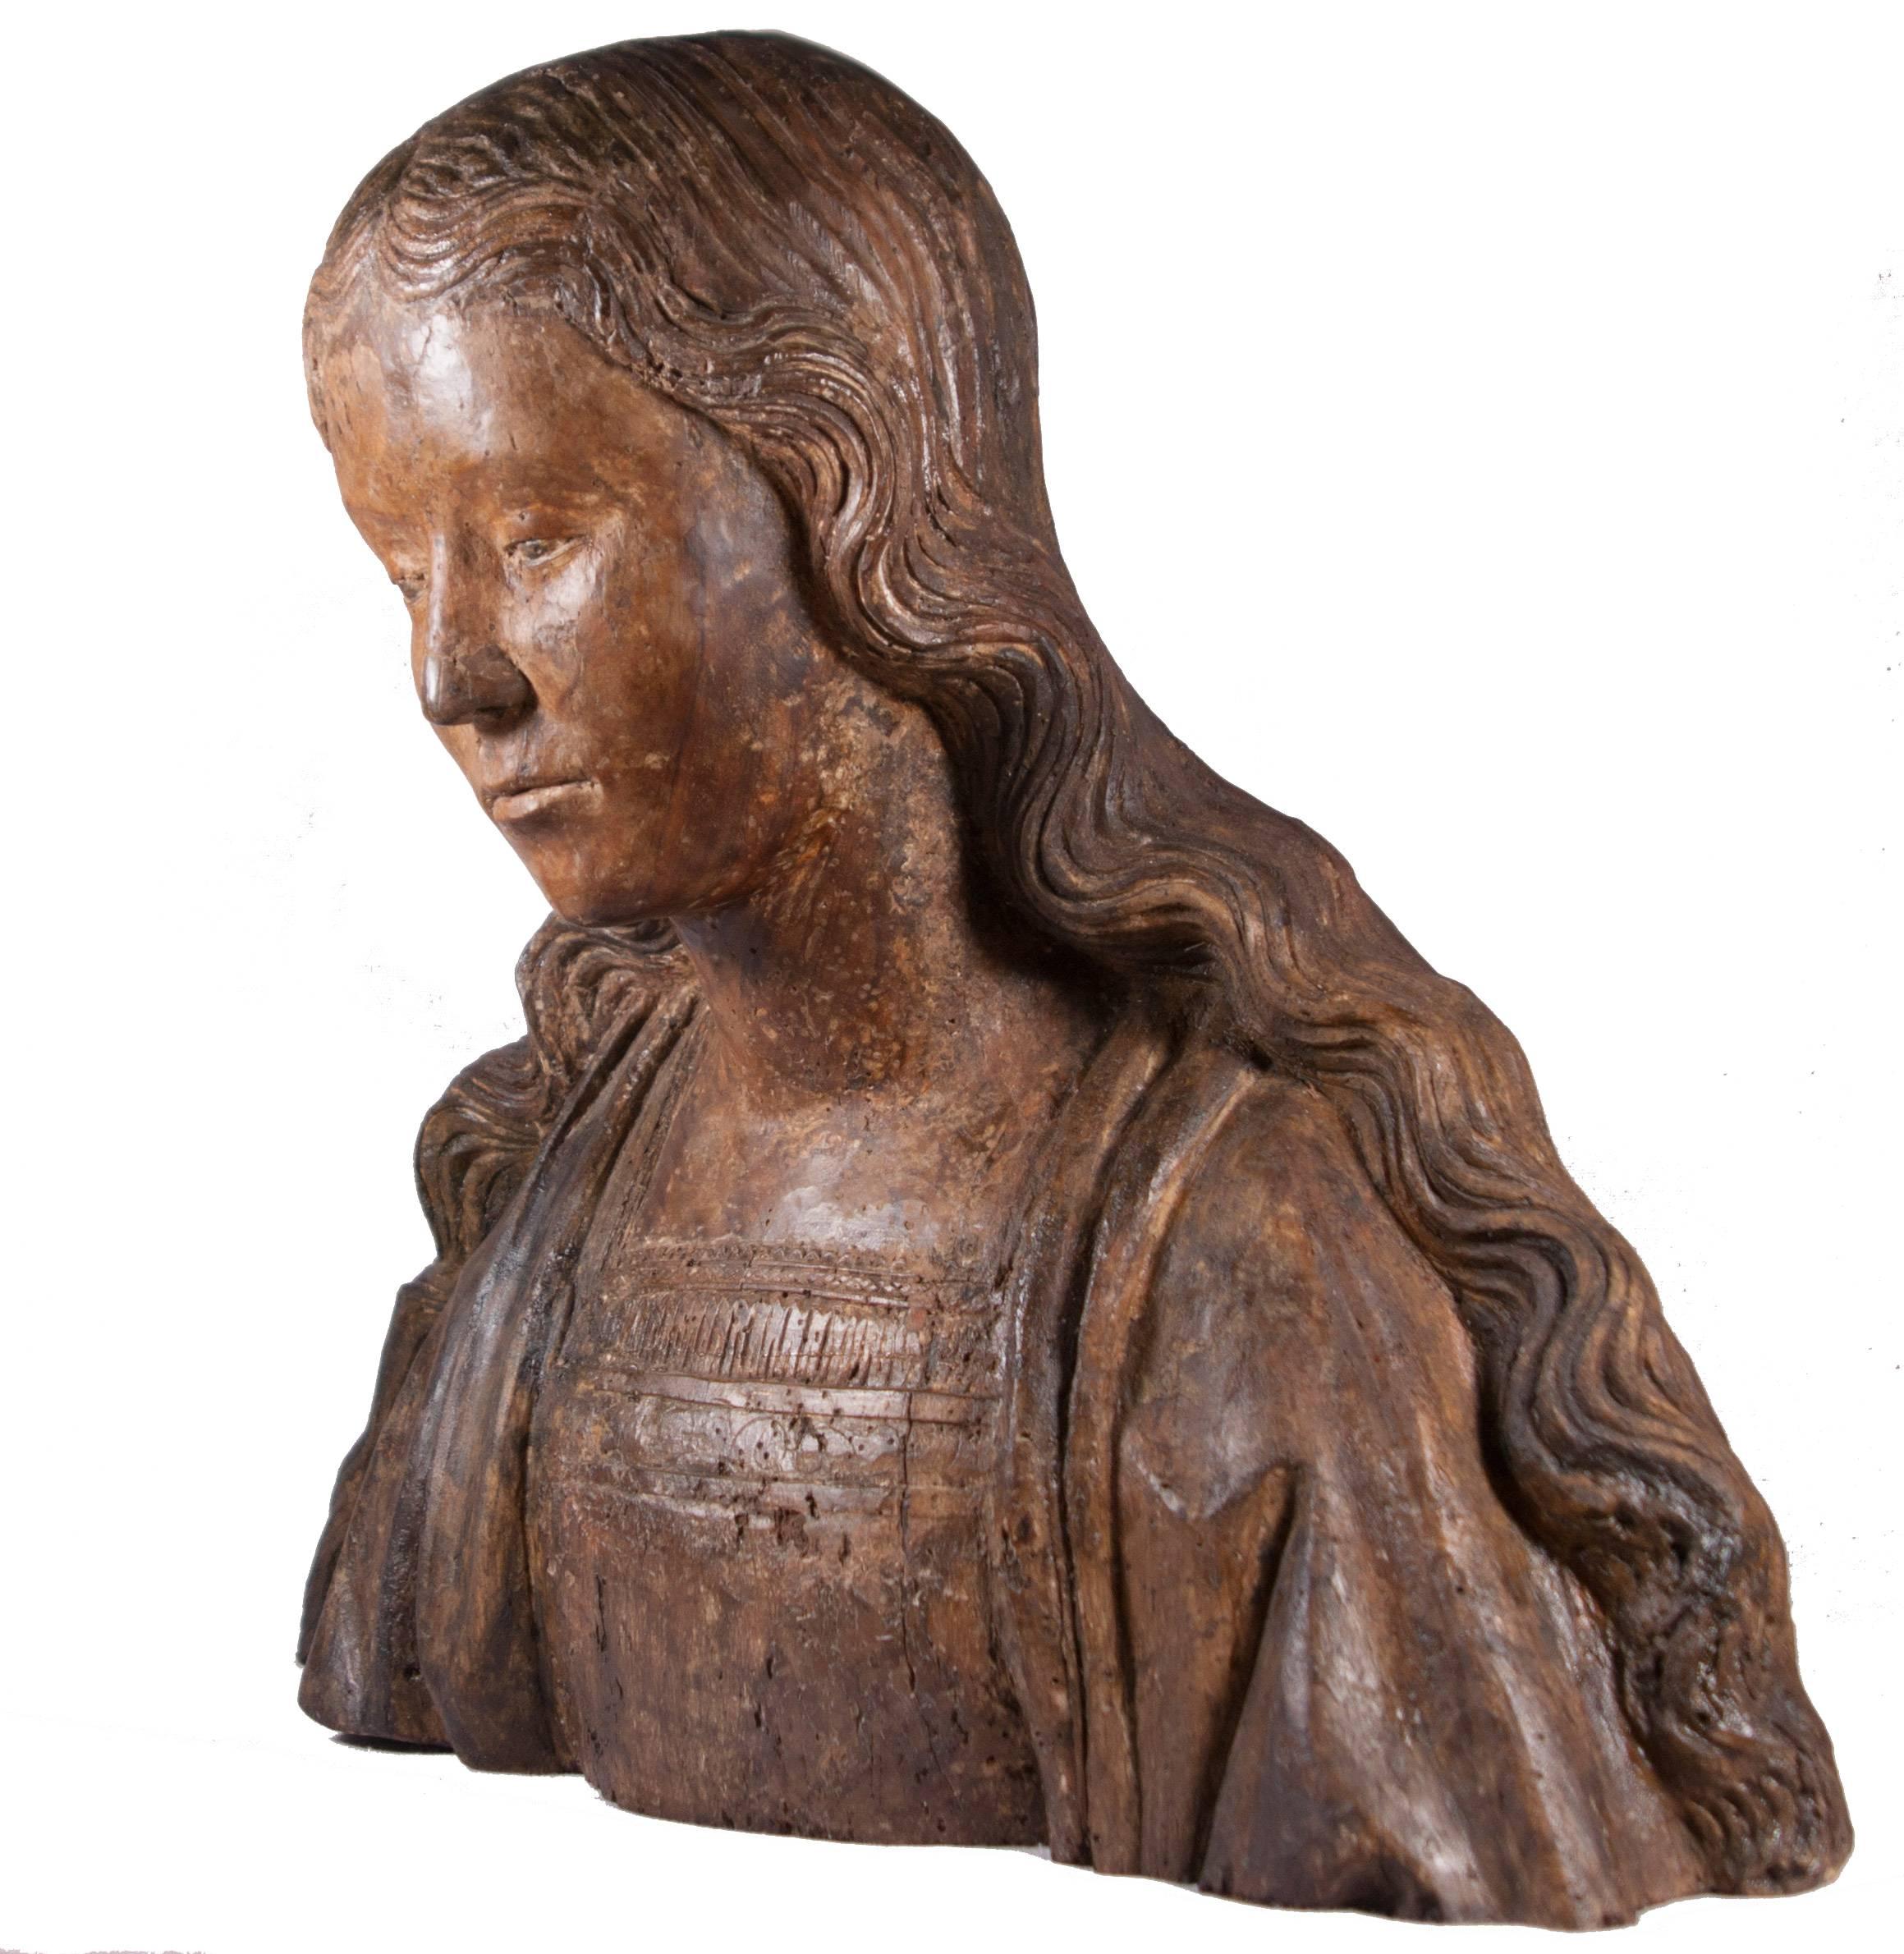 Unknown Figurative Sculpture - Bust of Virgin or Saint, circa 1500-1520, Northern France. 